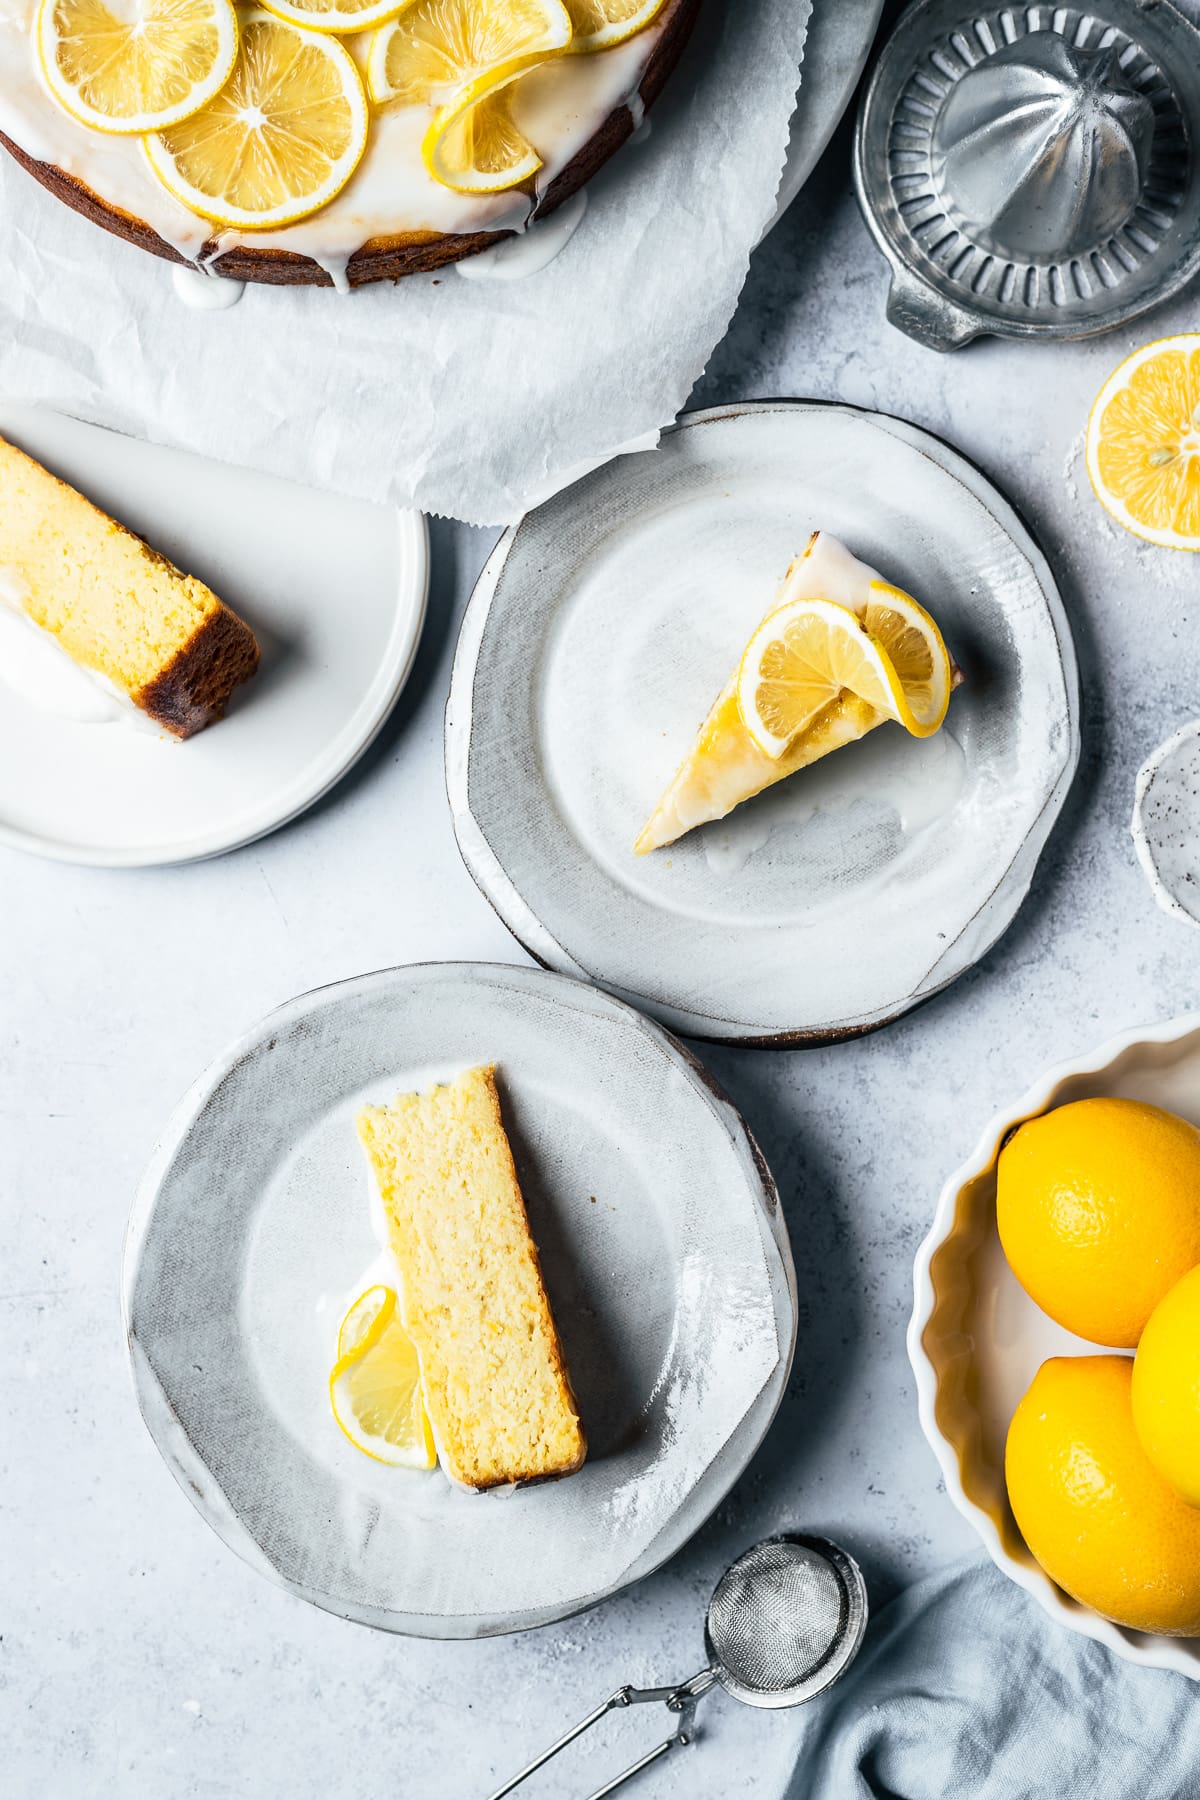 Three white ceramic plates hold slices of yellow cake with white glaze and lemon twists on a light blue concrete surface. A white bowl of lemons peeks into the frame at bottom right, and the rest of the cake and a juicer are partially in the frame at top.